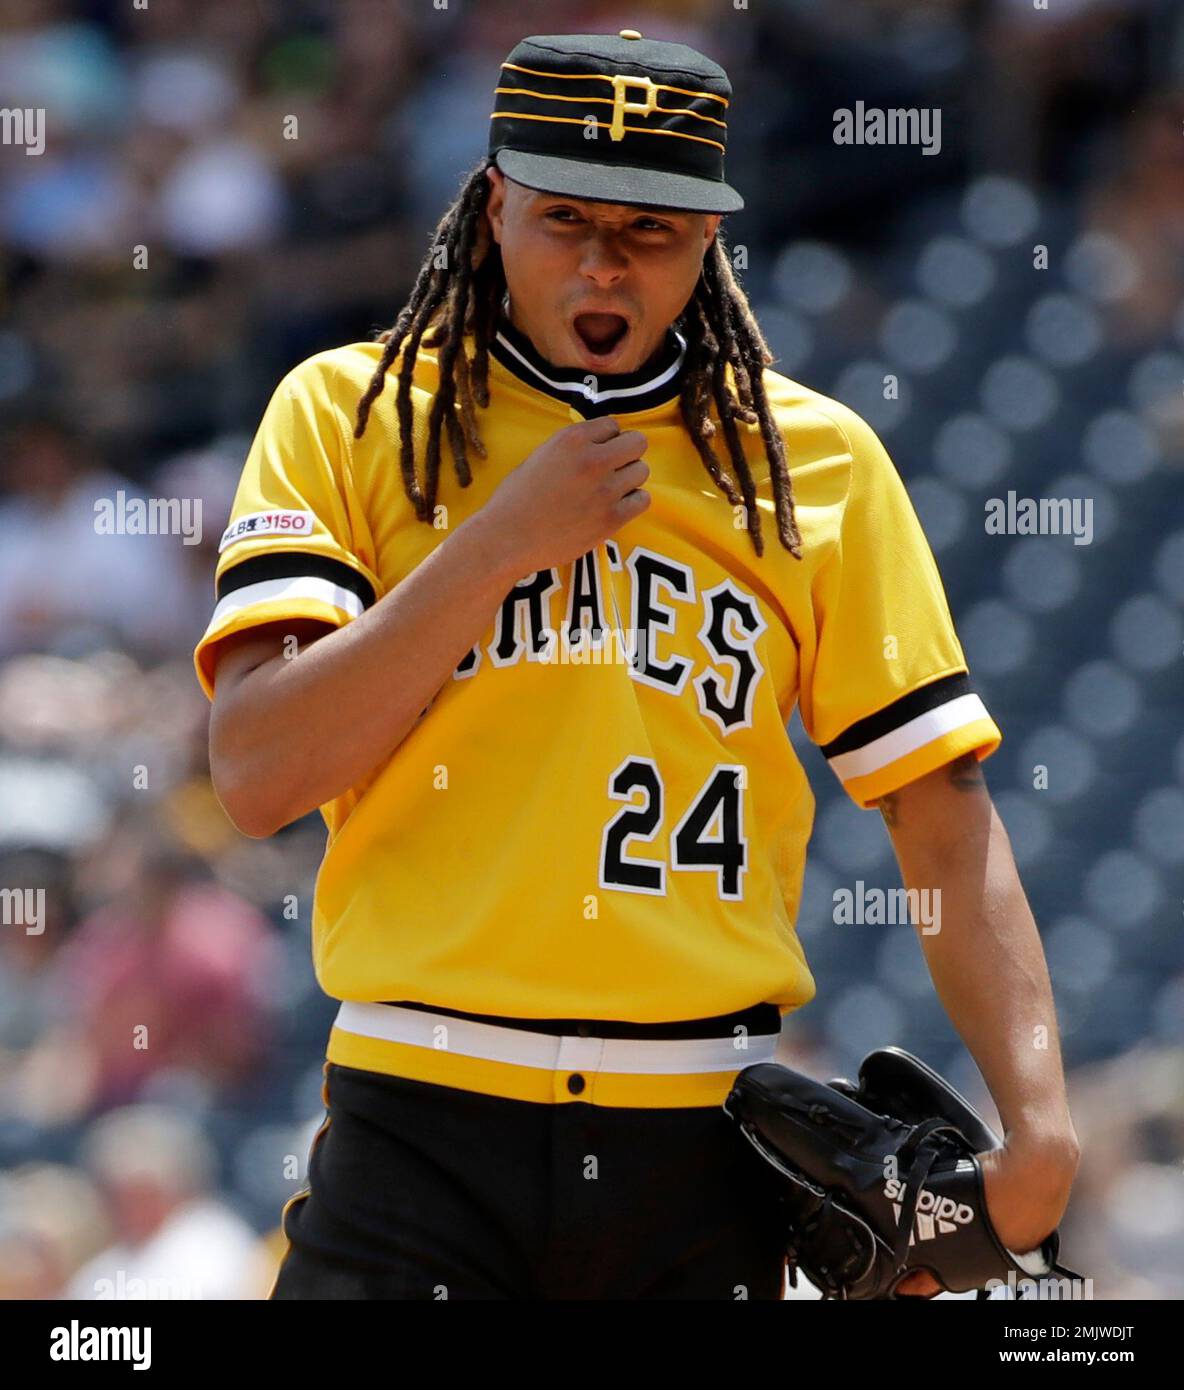 Pittsburgh Pirates starting pitcher Chris Archer collects himself on the  mound after giving up a solo home run to Los Angeles Dodgers' Corey Seager  during the second inning of a baseball game